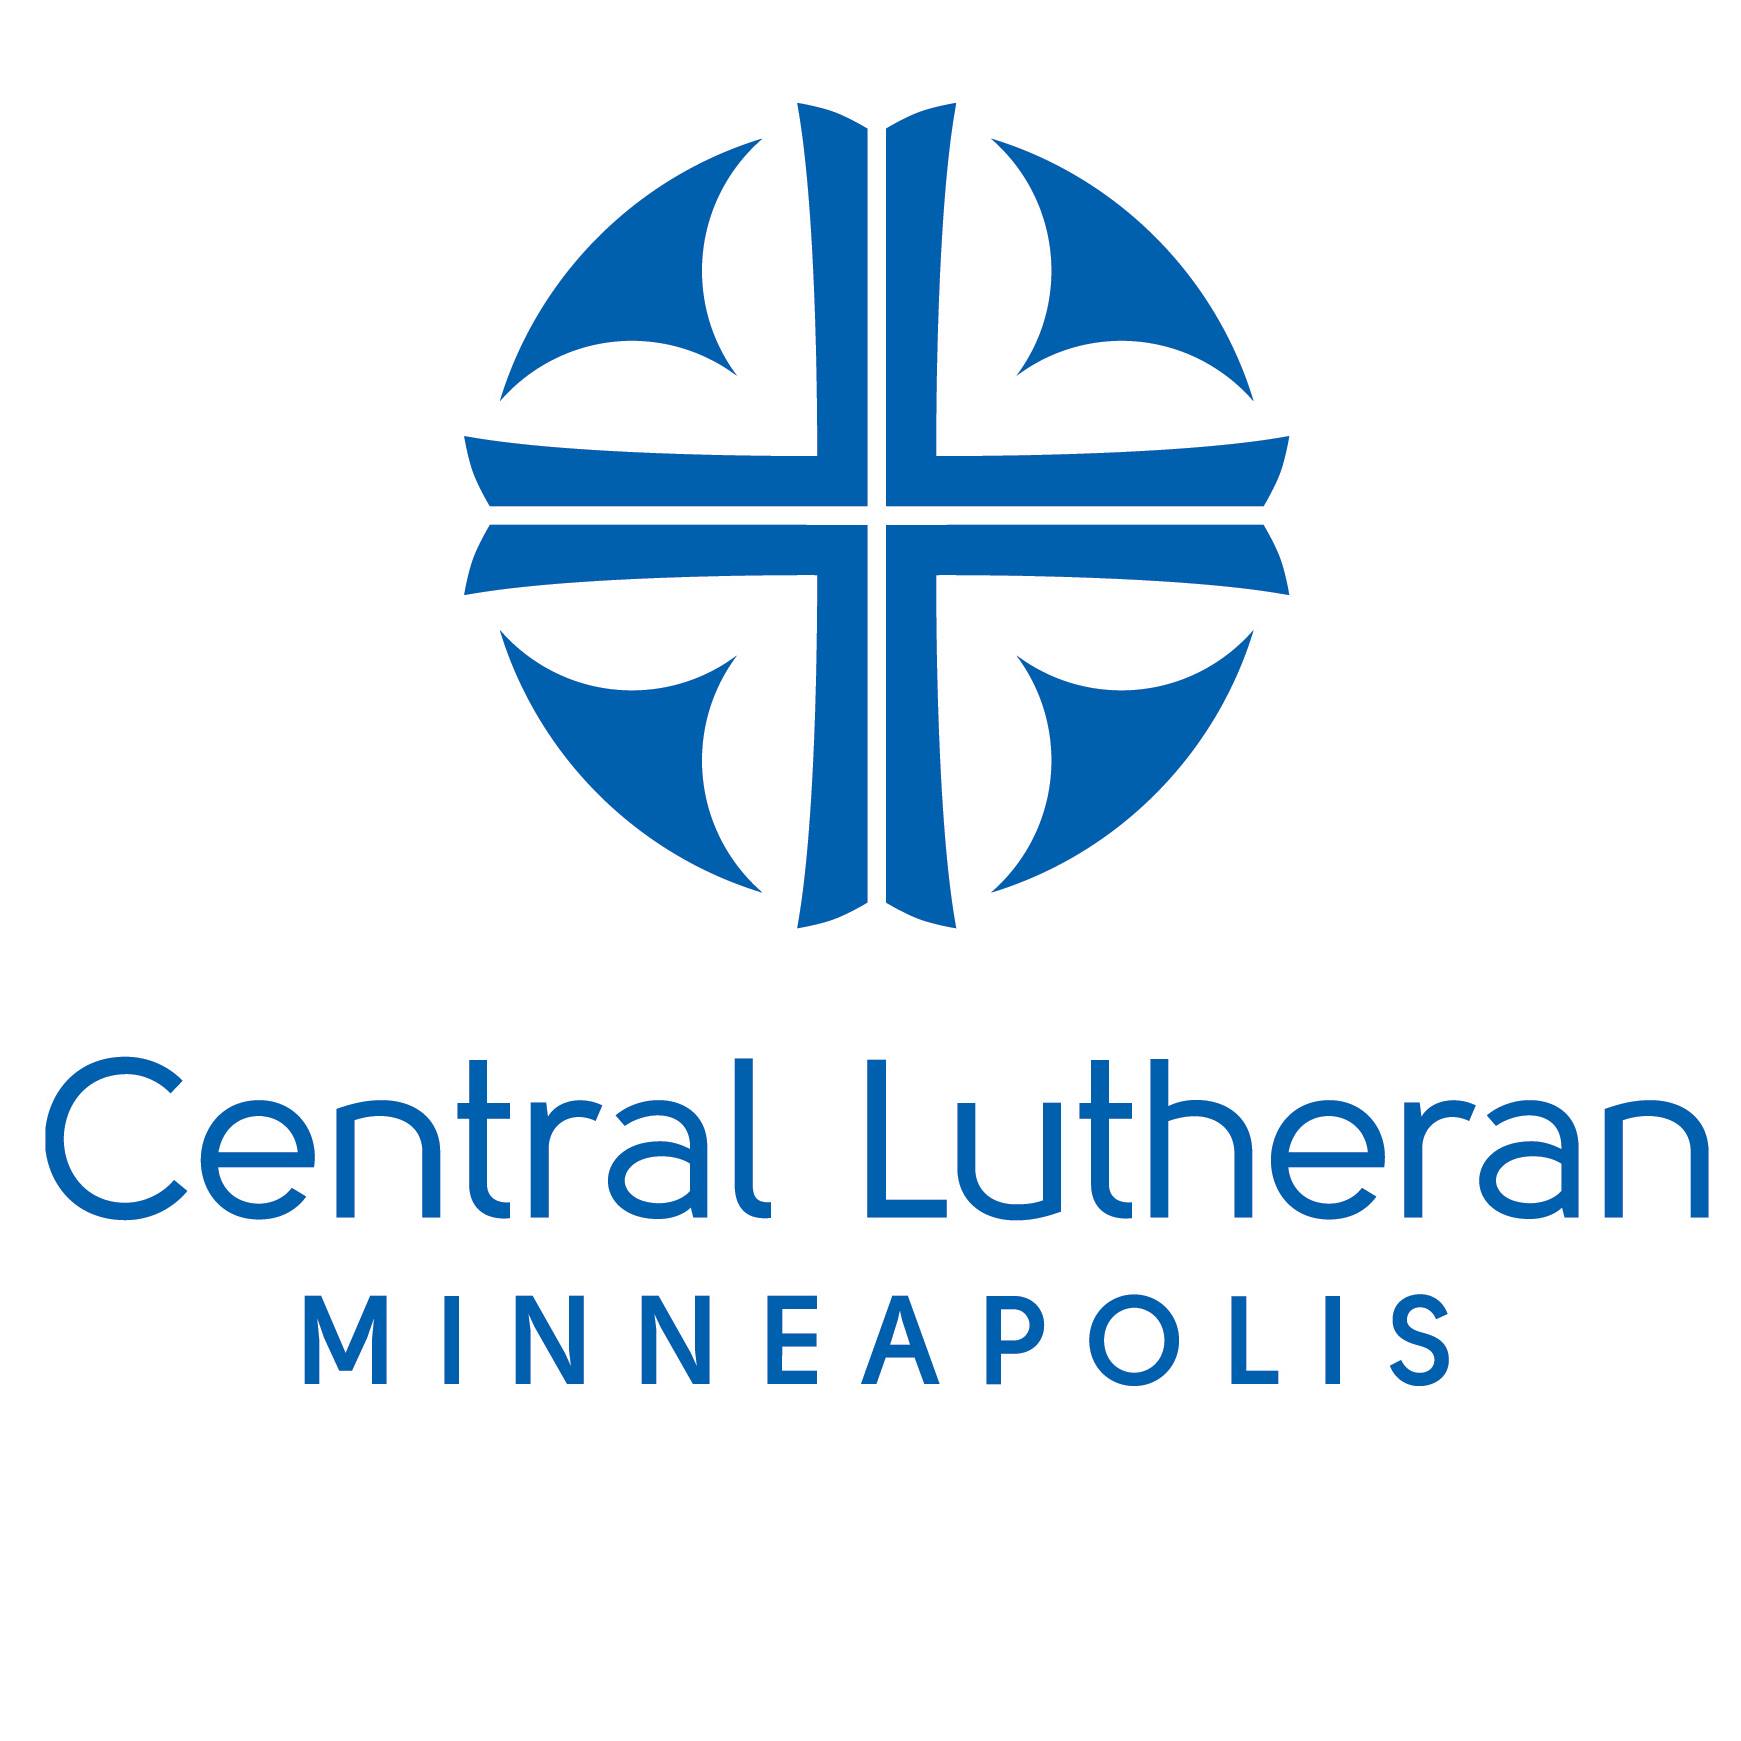 Central Lutheran Community Meals